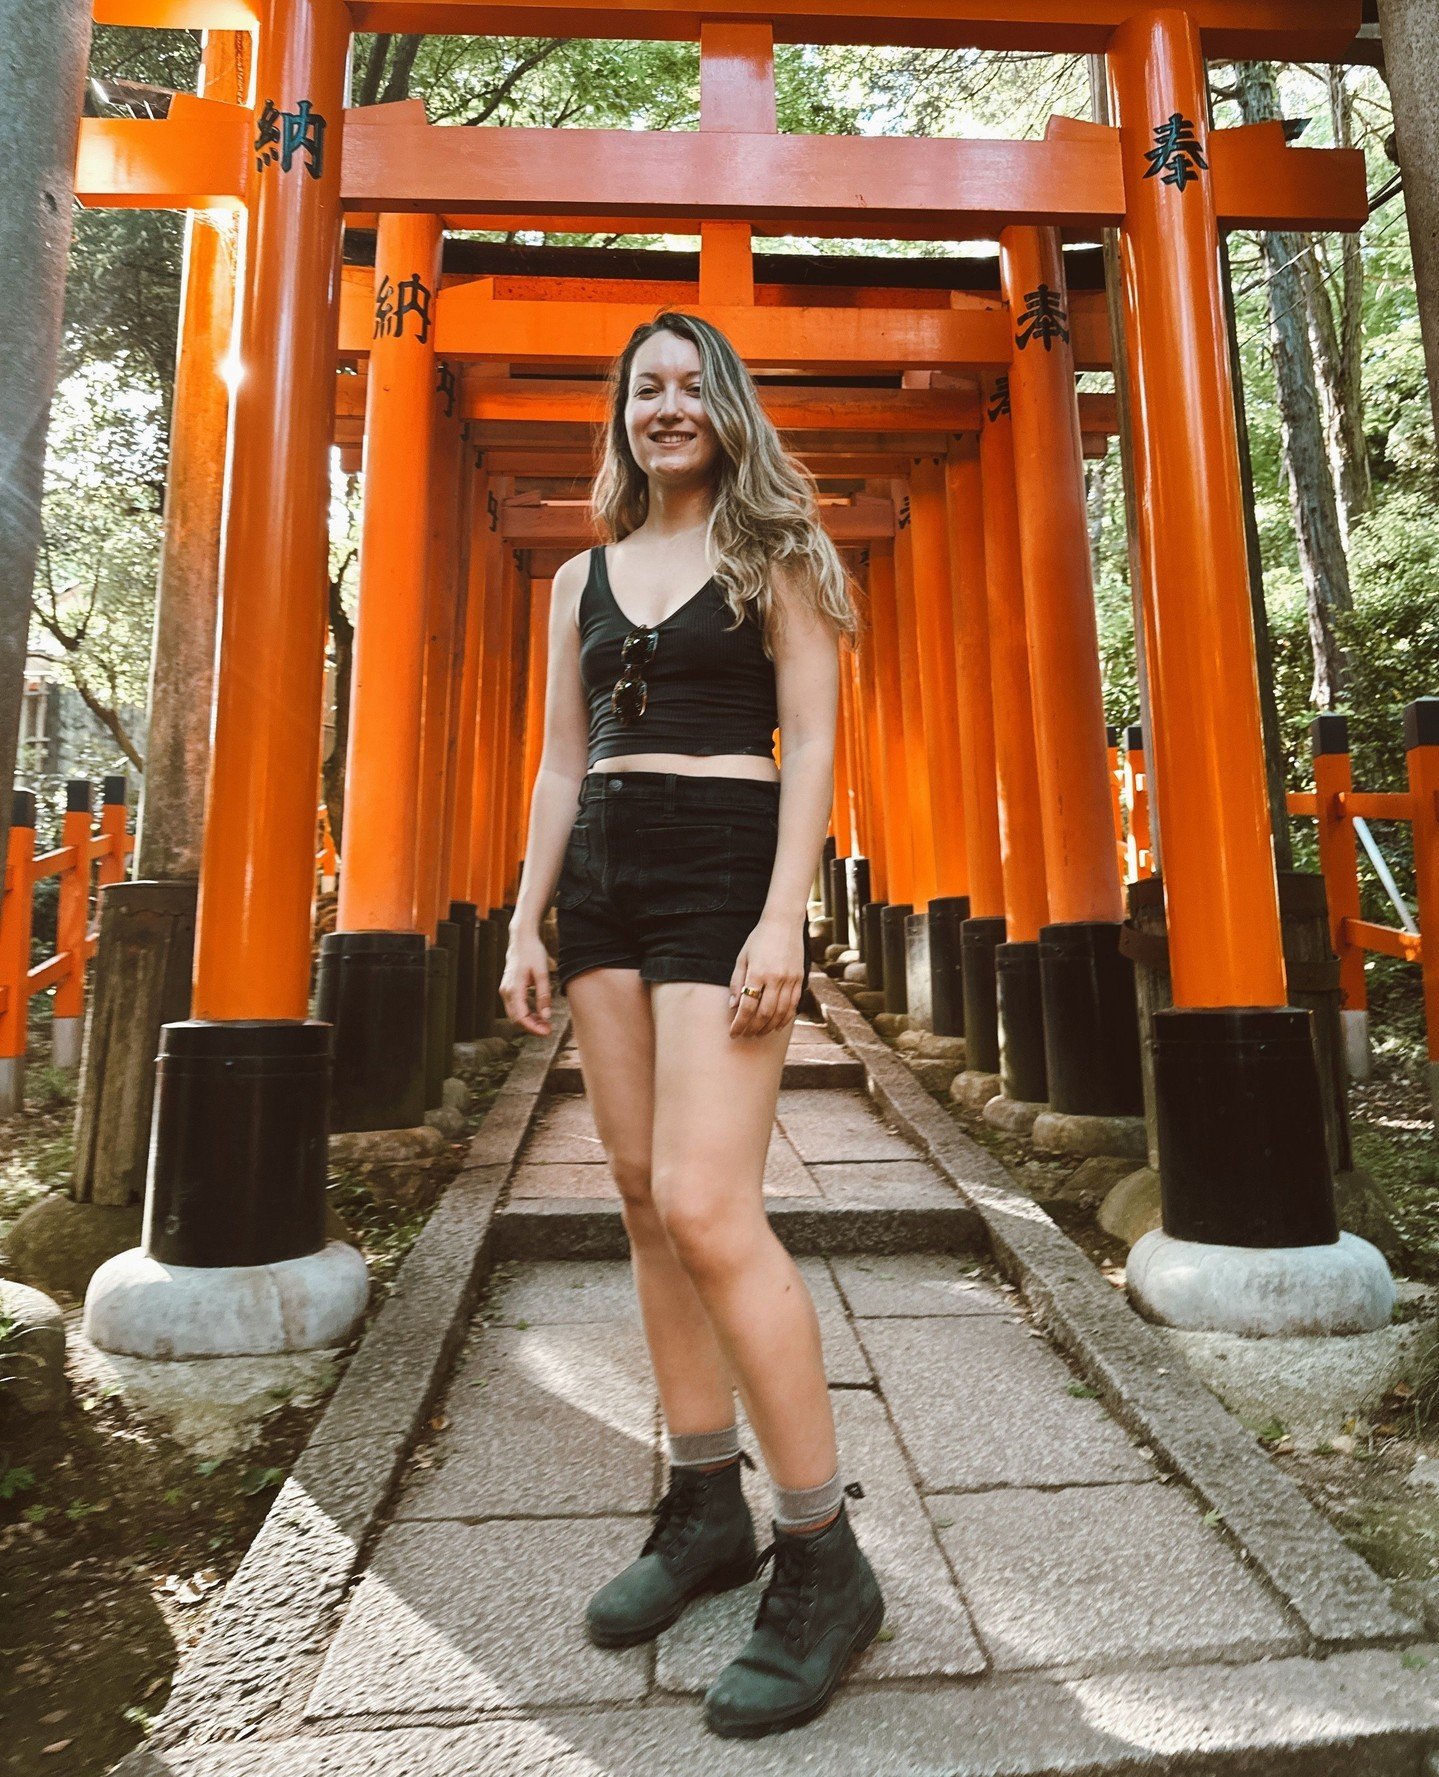 It's been a month of writing and working remotely in Kyoto, Japan -- an absolute dream. ✨ Days spent drinking matcha, exploring shrines, reading in sprawling gardens, and writing in coffeeshops built inside traditional Japanese buildings. ✍️ The beau